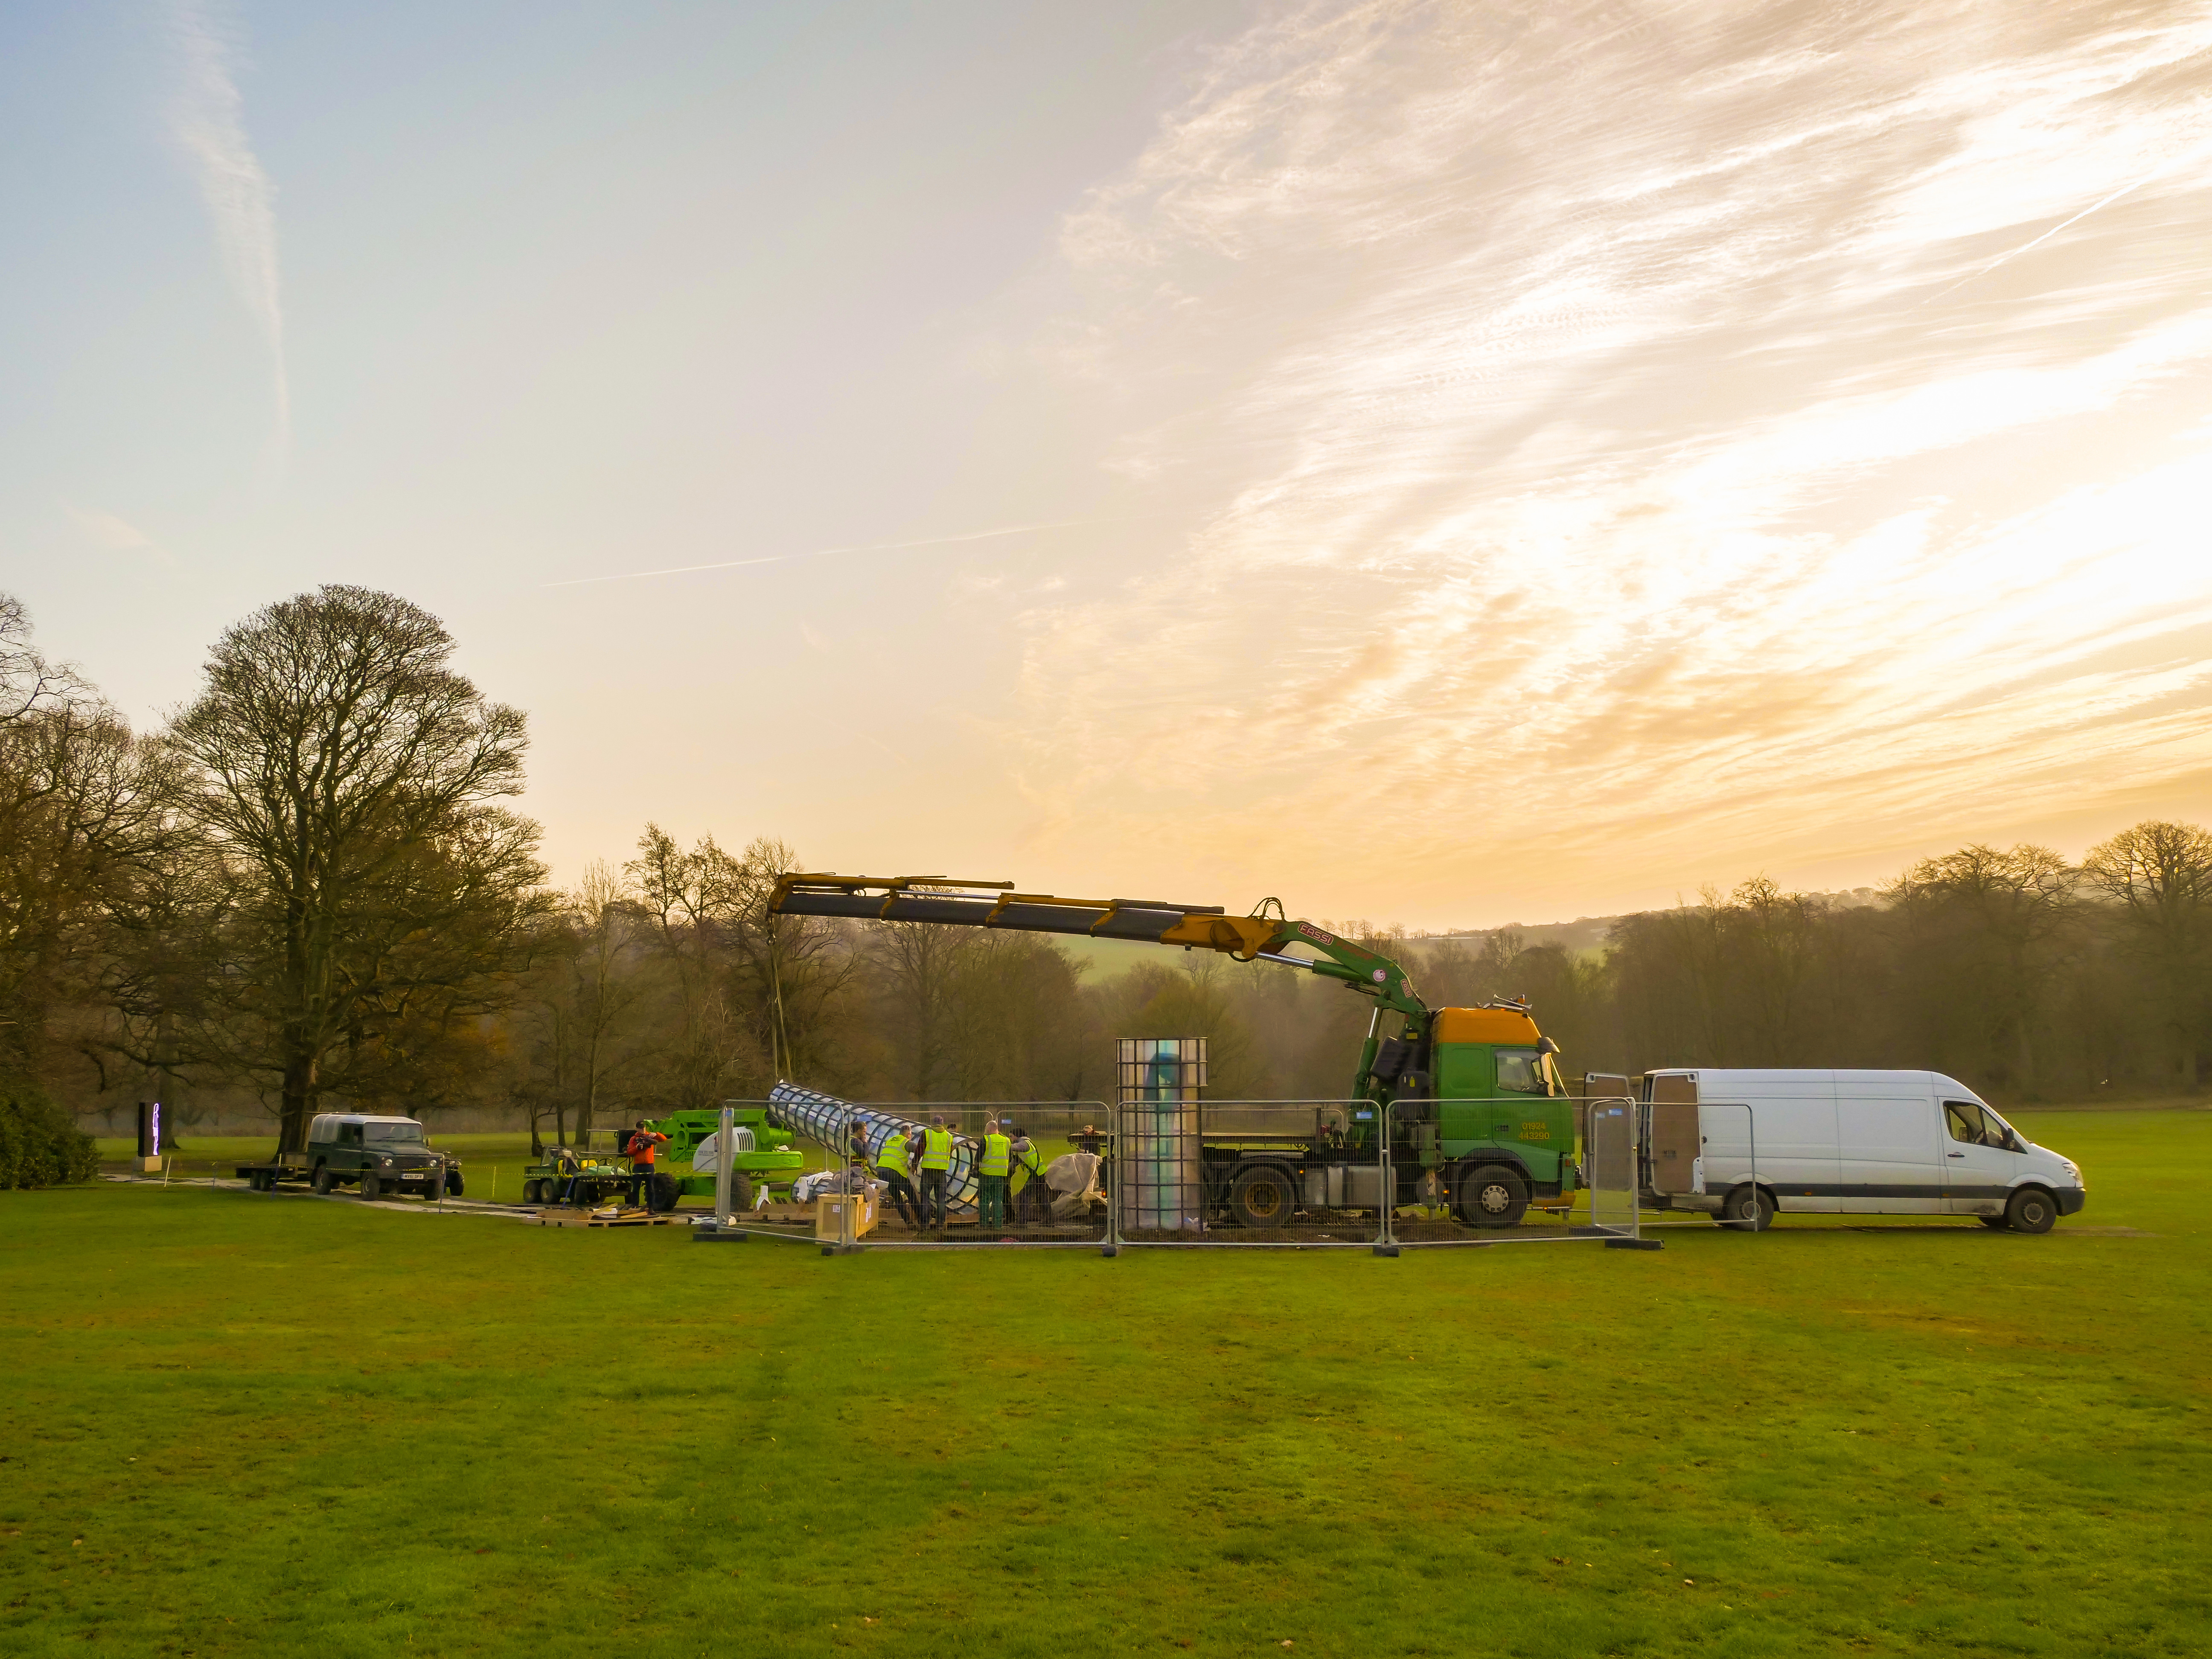 Installing Kimsooja – A Needle Woman 2014 at Yorkshire Sculpture Park